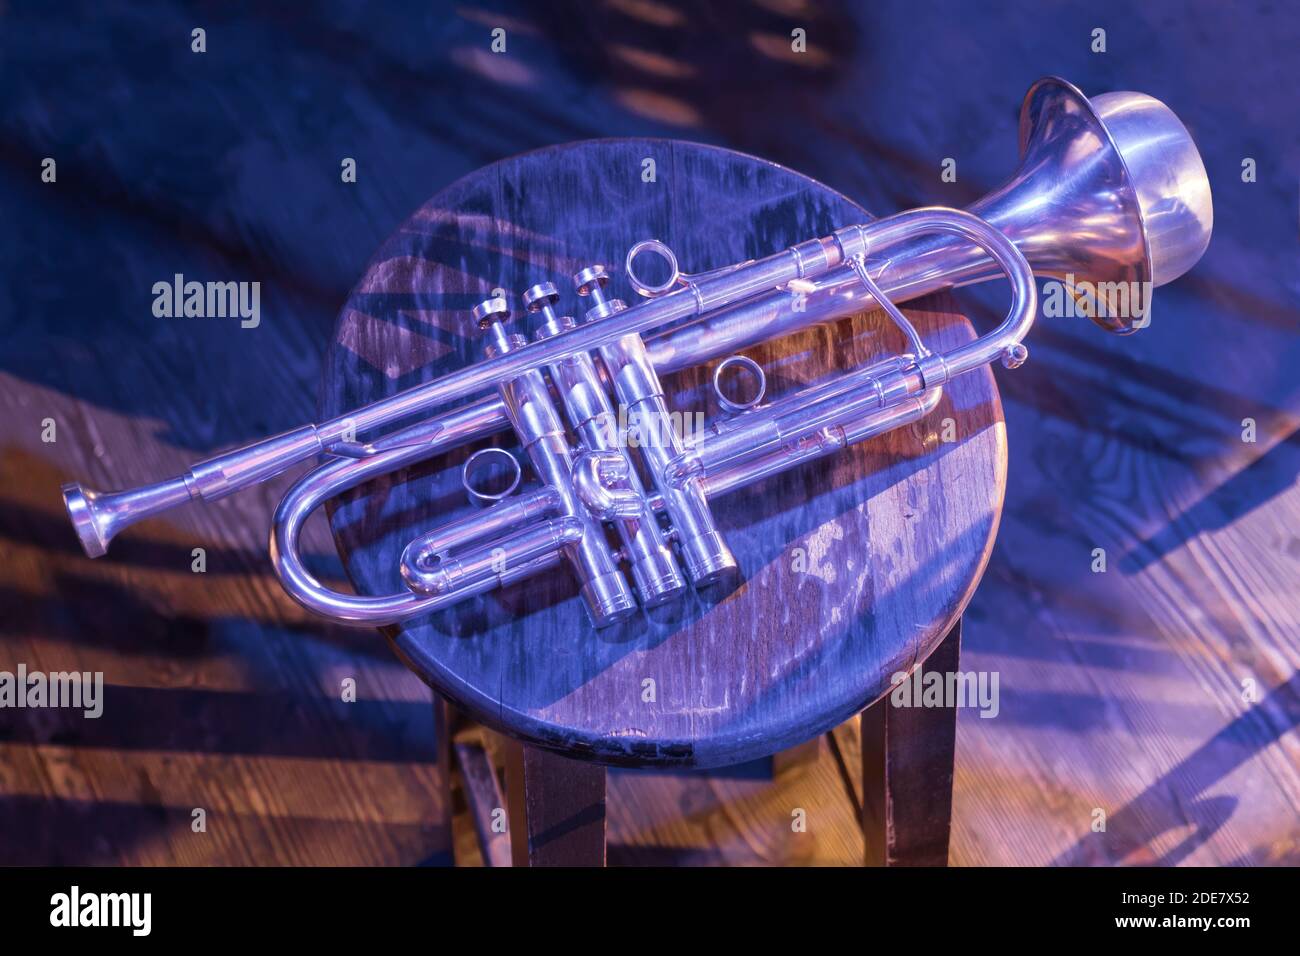 Contemporary Jazz. Wind Instrument. Brass Band. Relaxing Music. Live Music Online. Retro Music. Concert Solo Trumpet. Trumpet. Jazz Club. Trumpet with Stock Photo